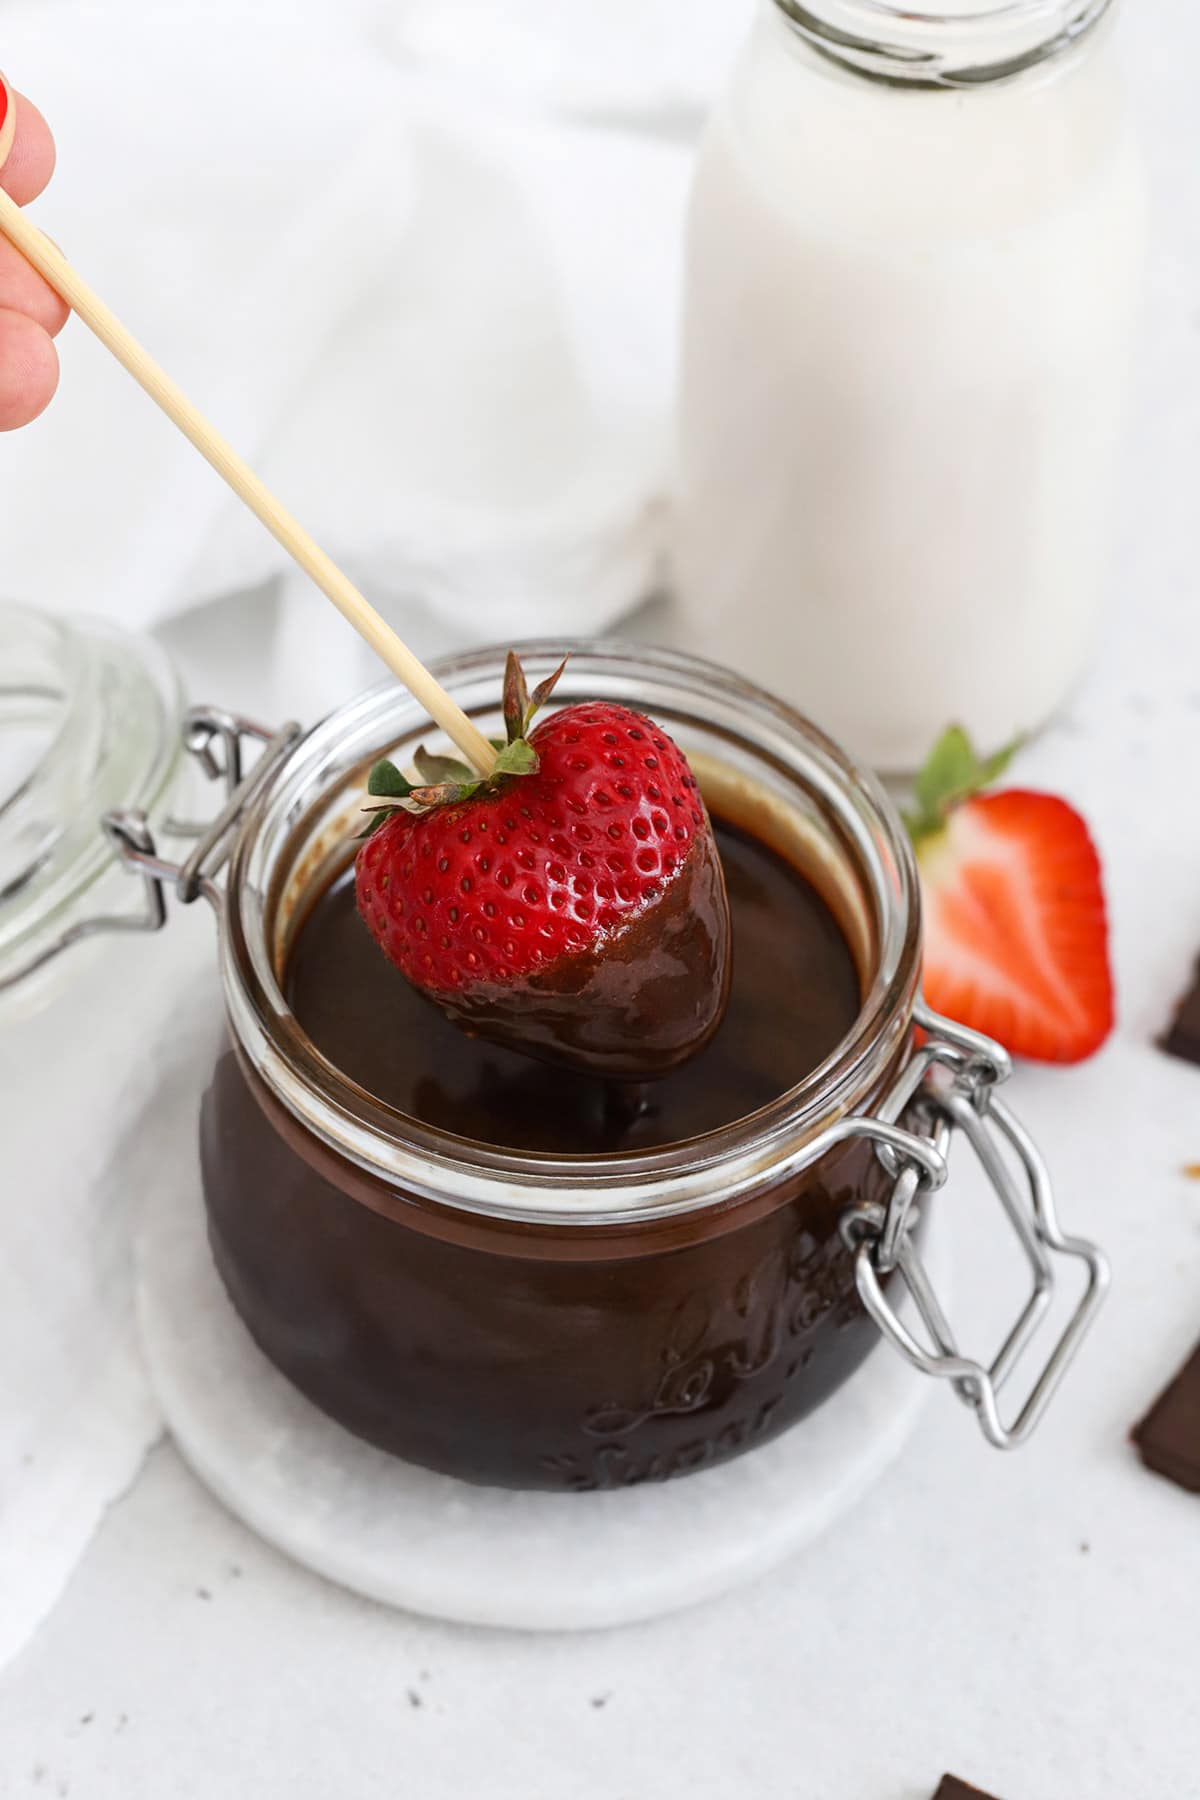 Dipping strawberries into a jar of homemade chocolate syrup